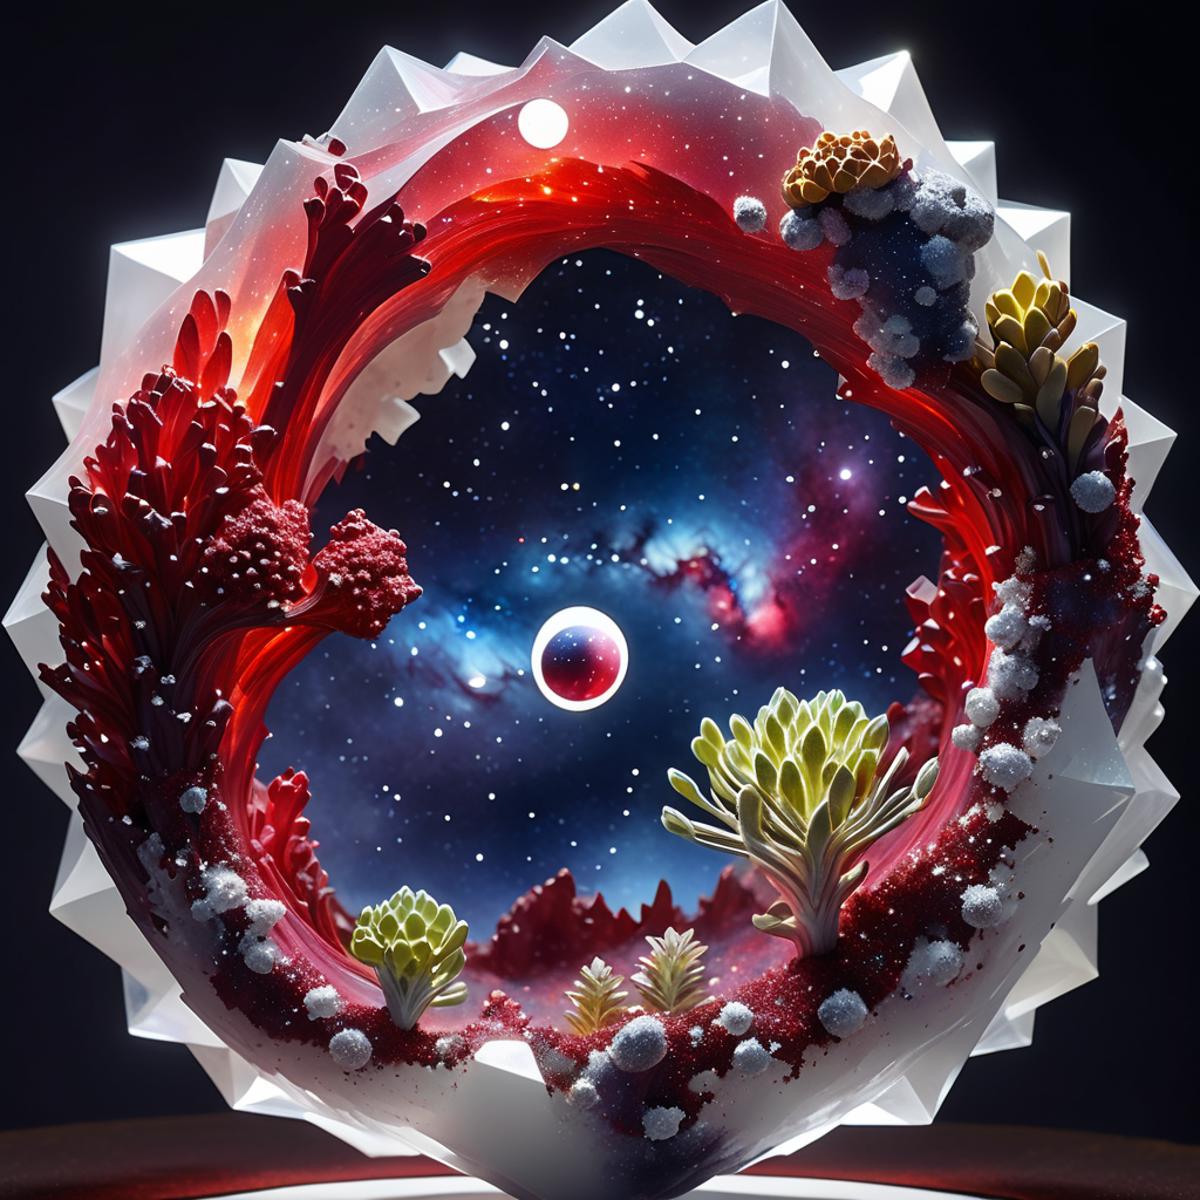 A 3D model of a celestial scene with a blue background, red and white objects, and a sun.